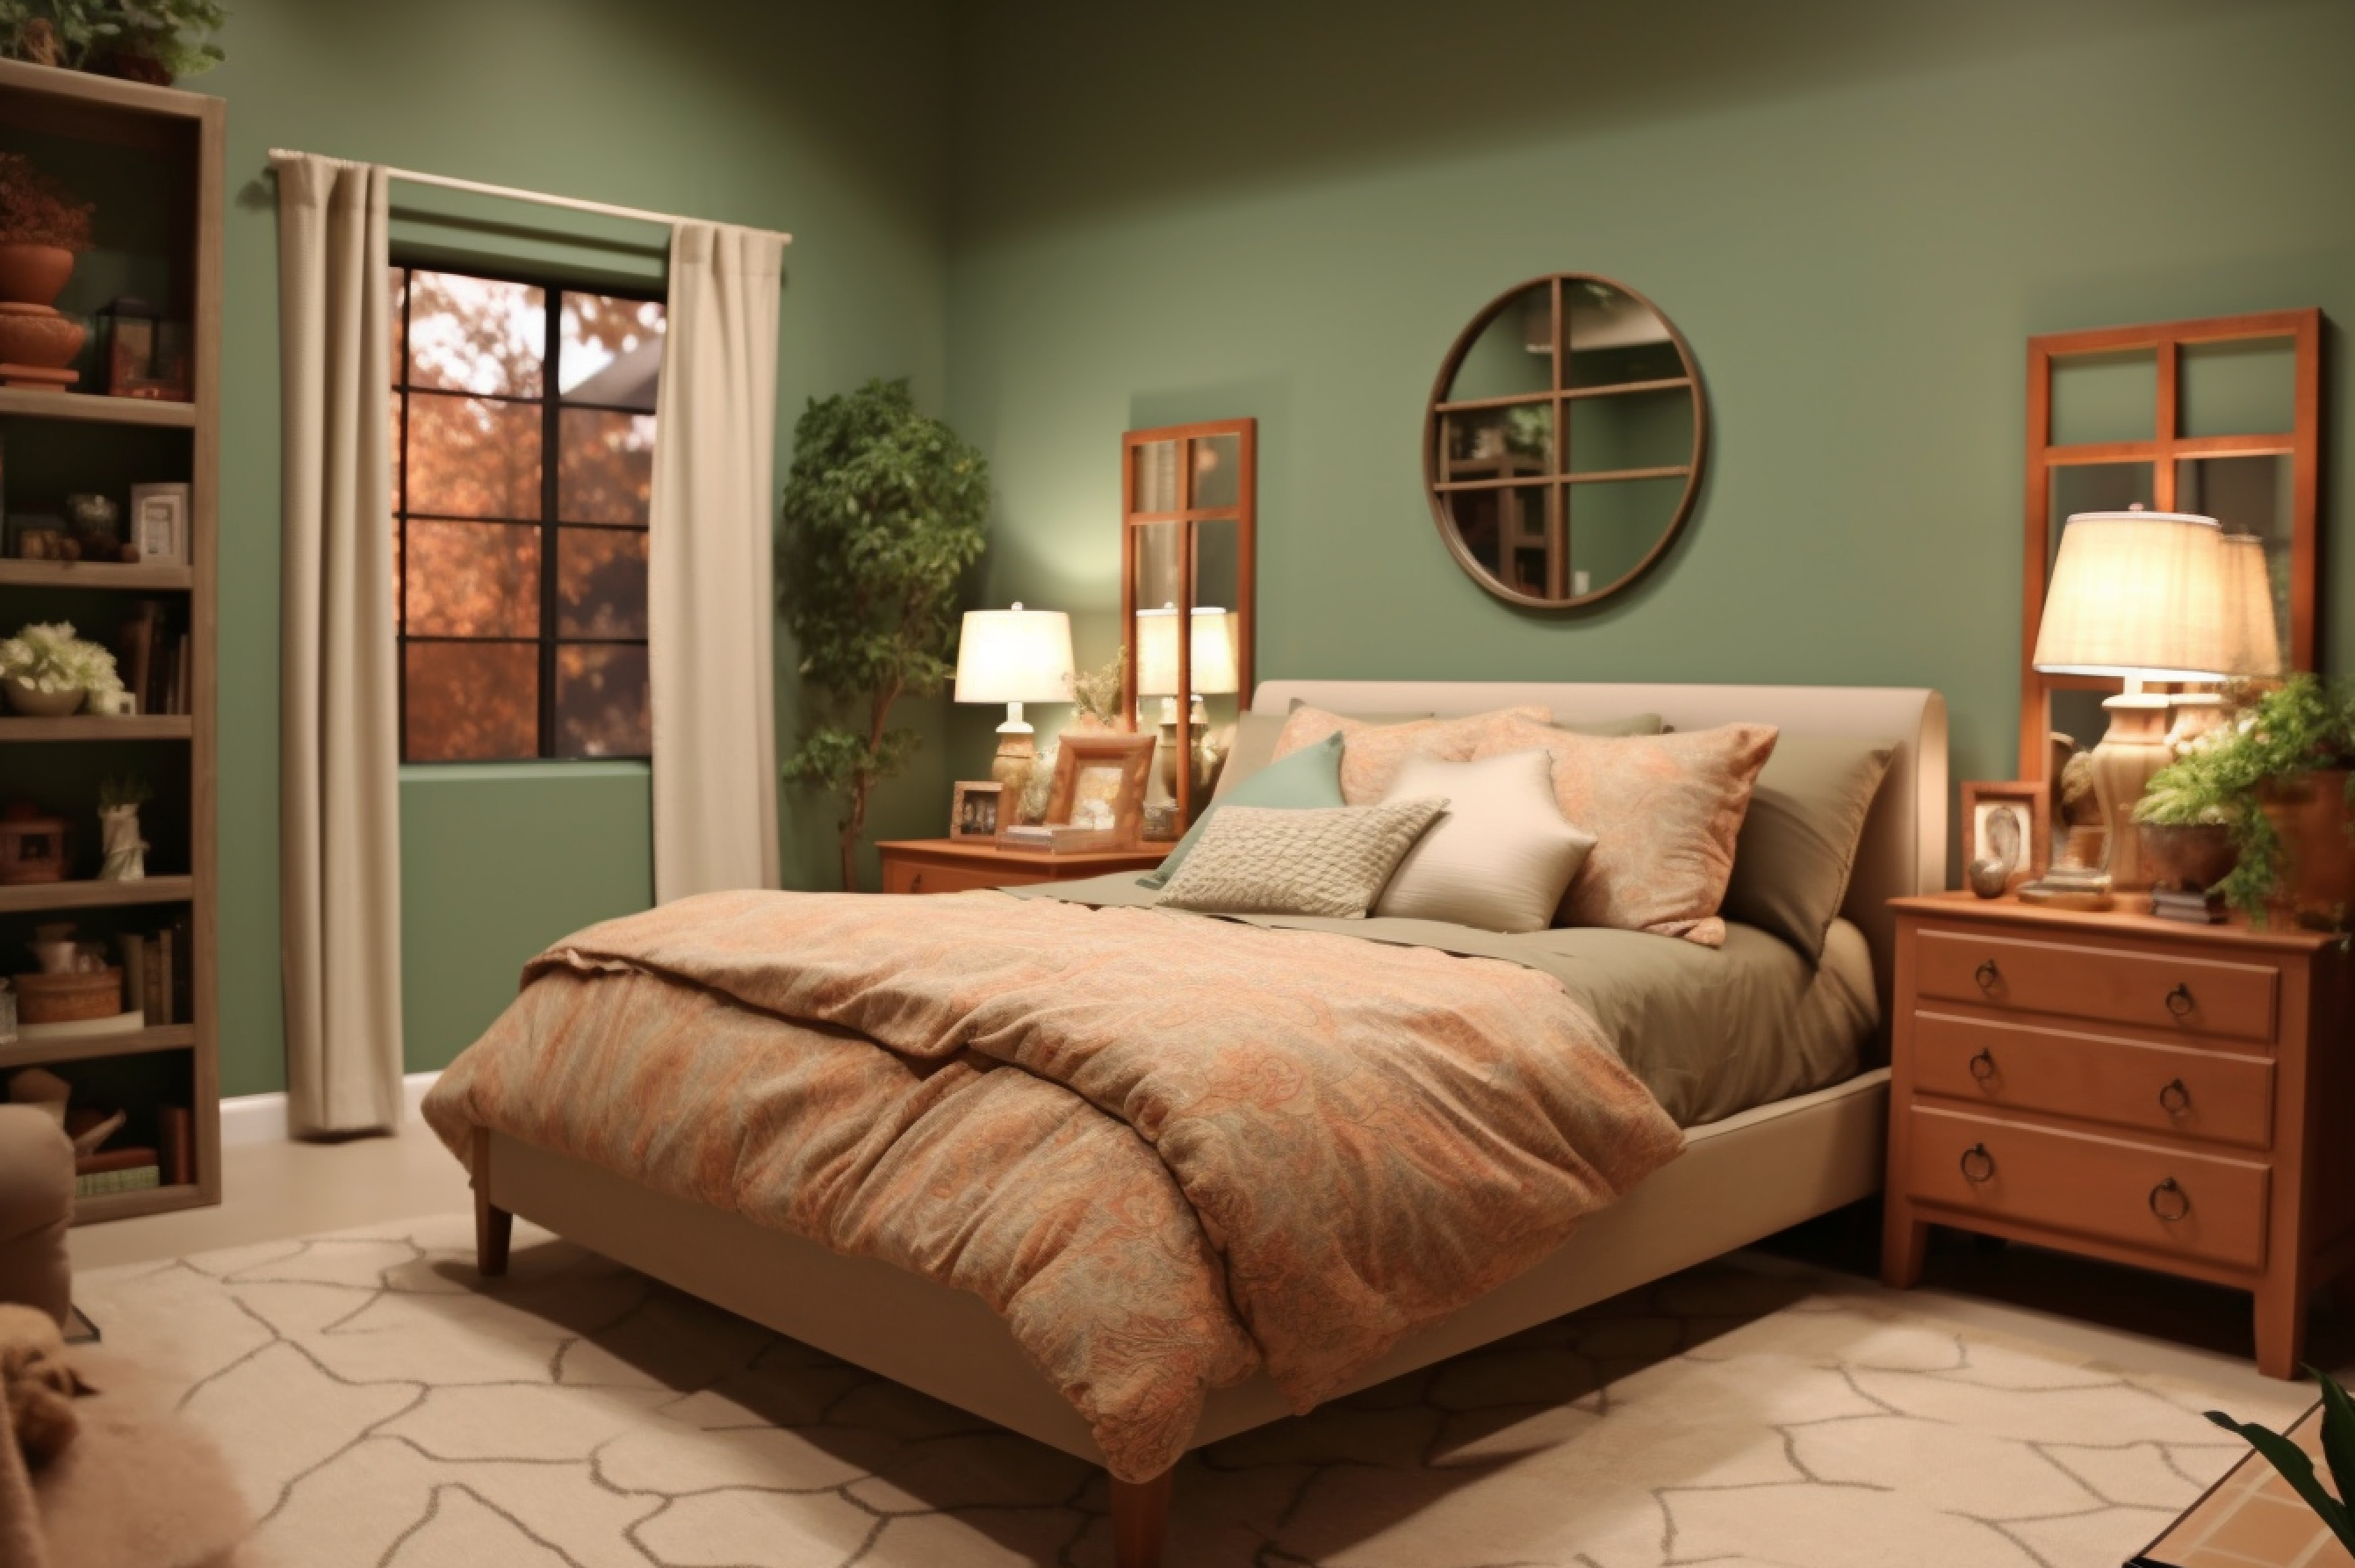 Snapshot of a cozy bedroom with sienna brown bedding against calming sage green walls.